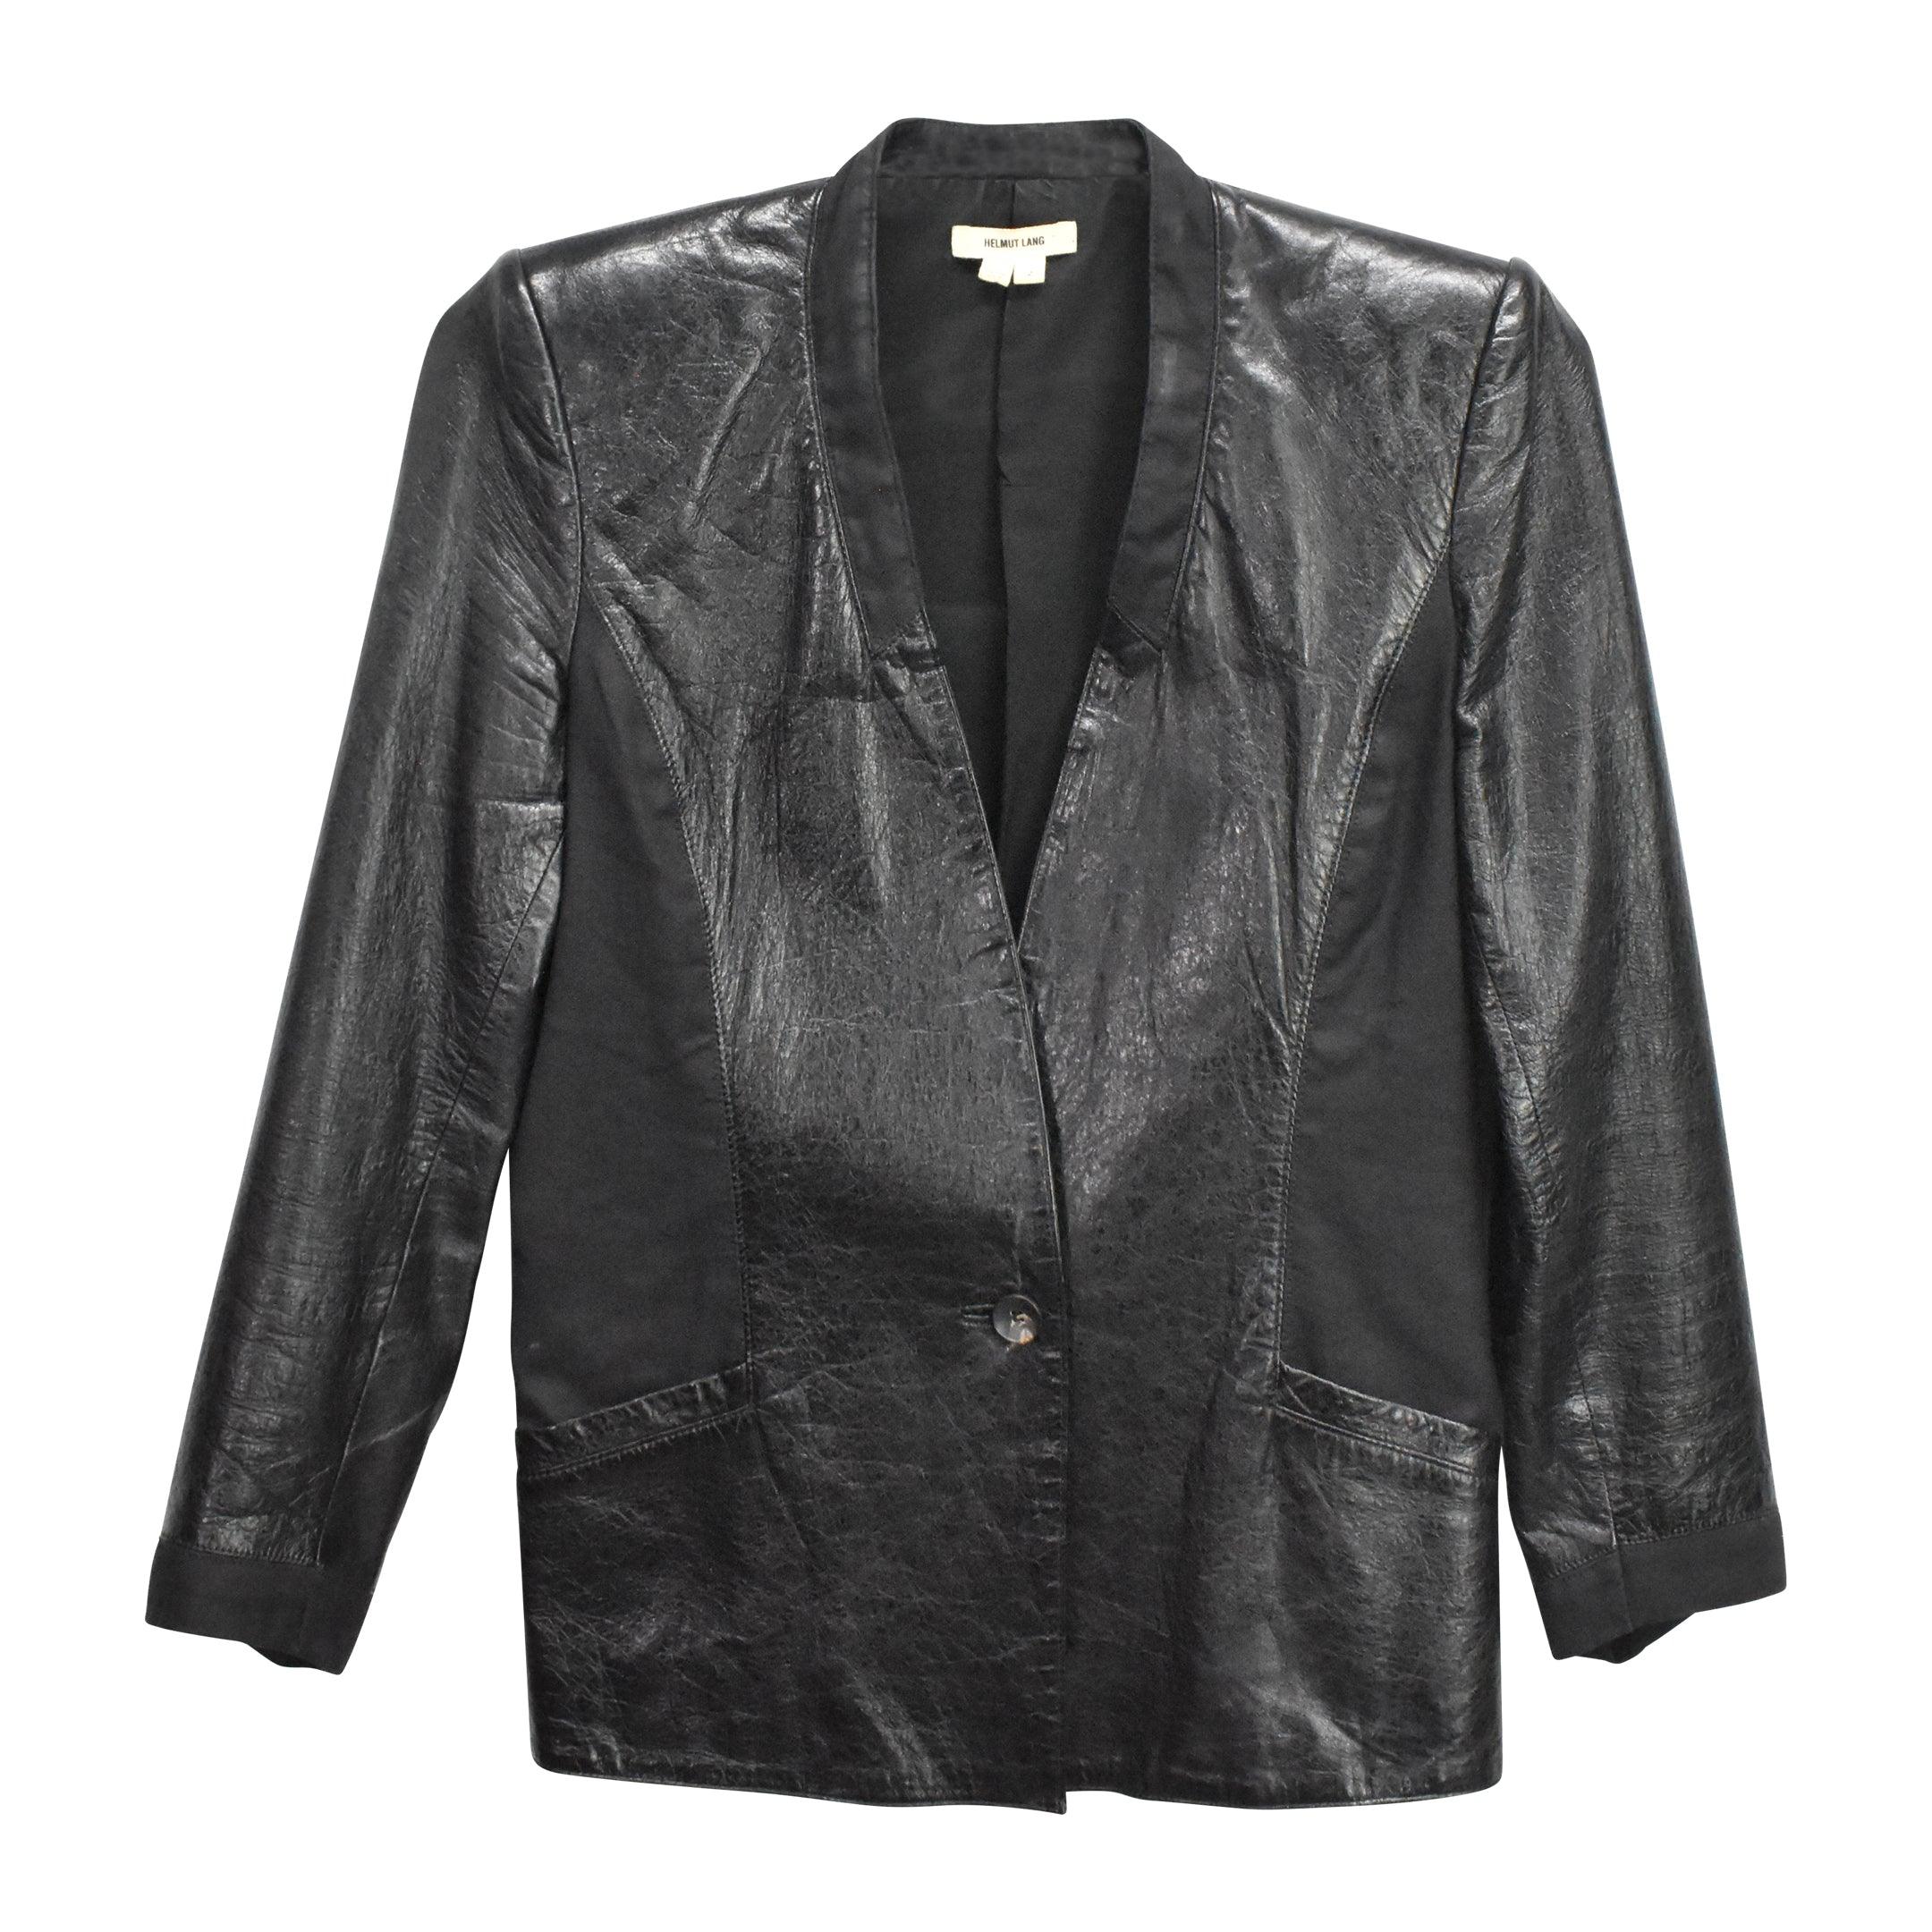 Helmut Lang Jacket - Women's 2 - Fashionably Yours